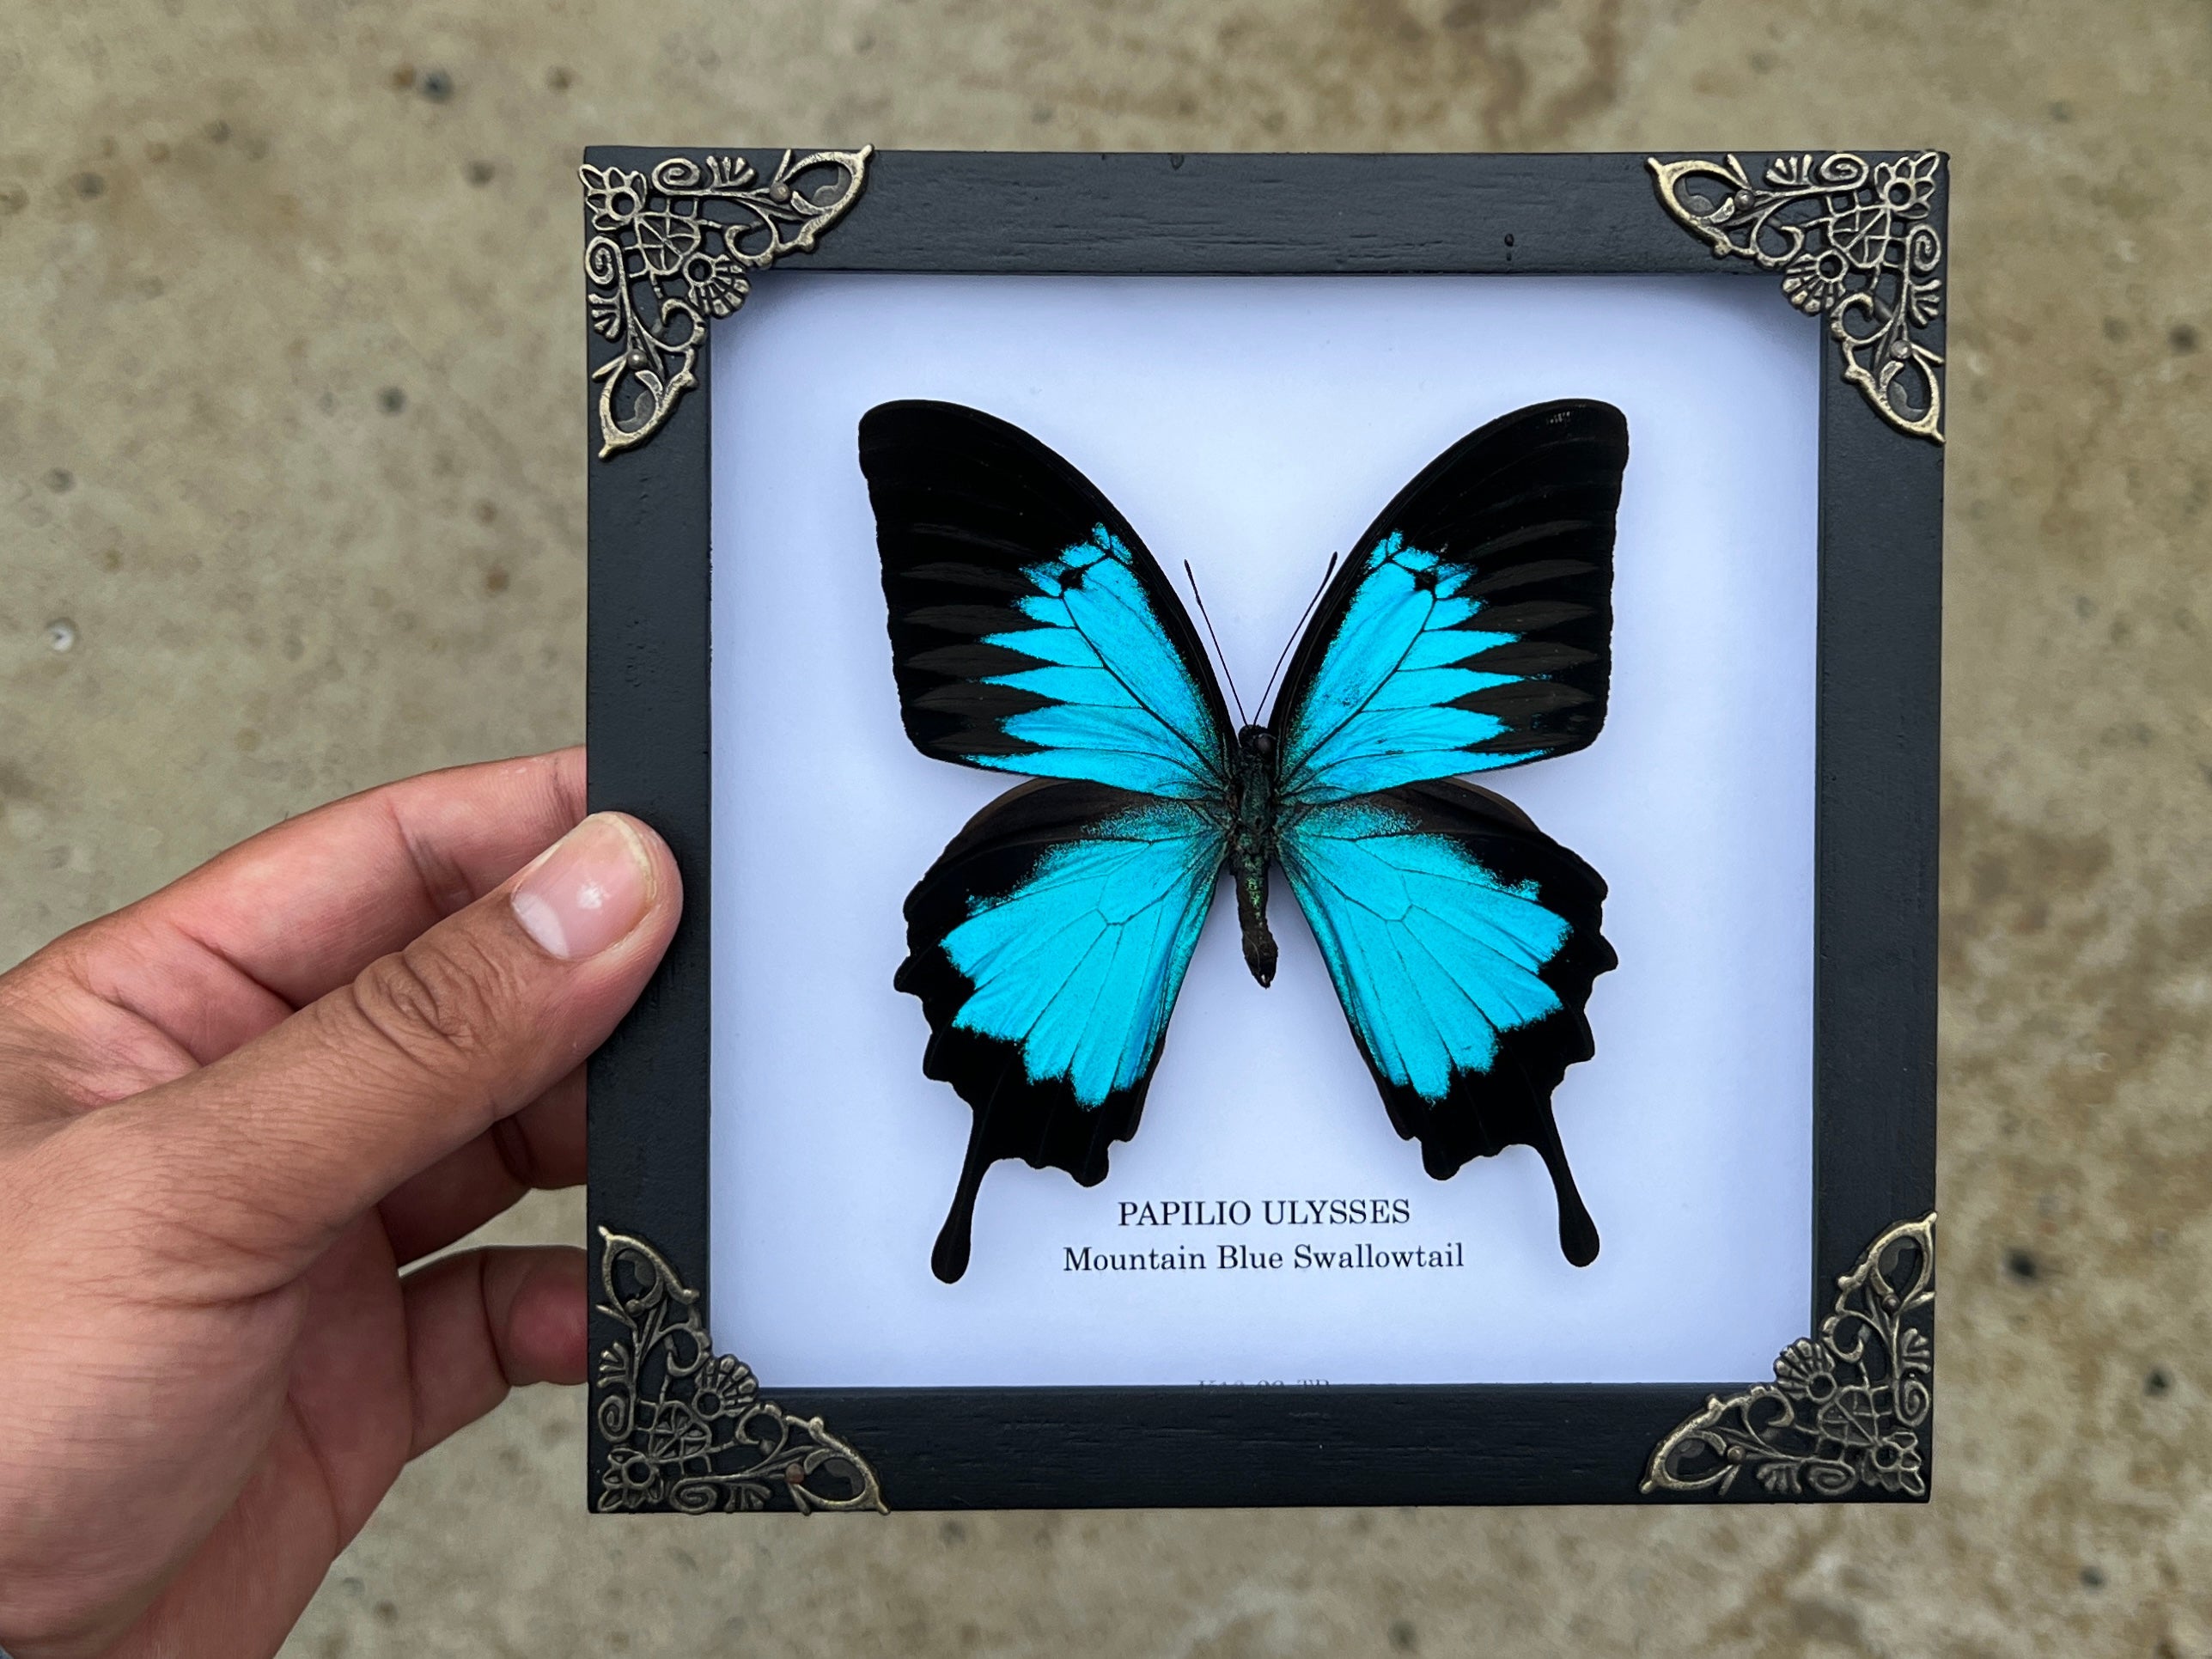 Vinatimes Real Framed Blue Swallowtail Butterfly Handmade Wooden Frame Shadow Box Dried Insect Bug Dead Lover Taxidermy Specimen Display Tabletop Wall Art Hanging Artwork Home Decor Reading Gallery K16-28-TR - Vinacreations